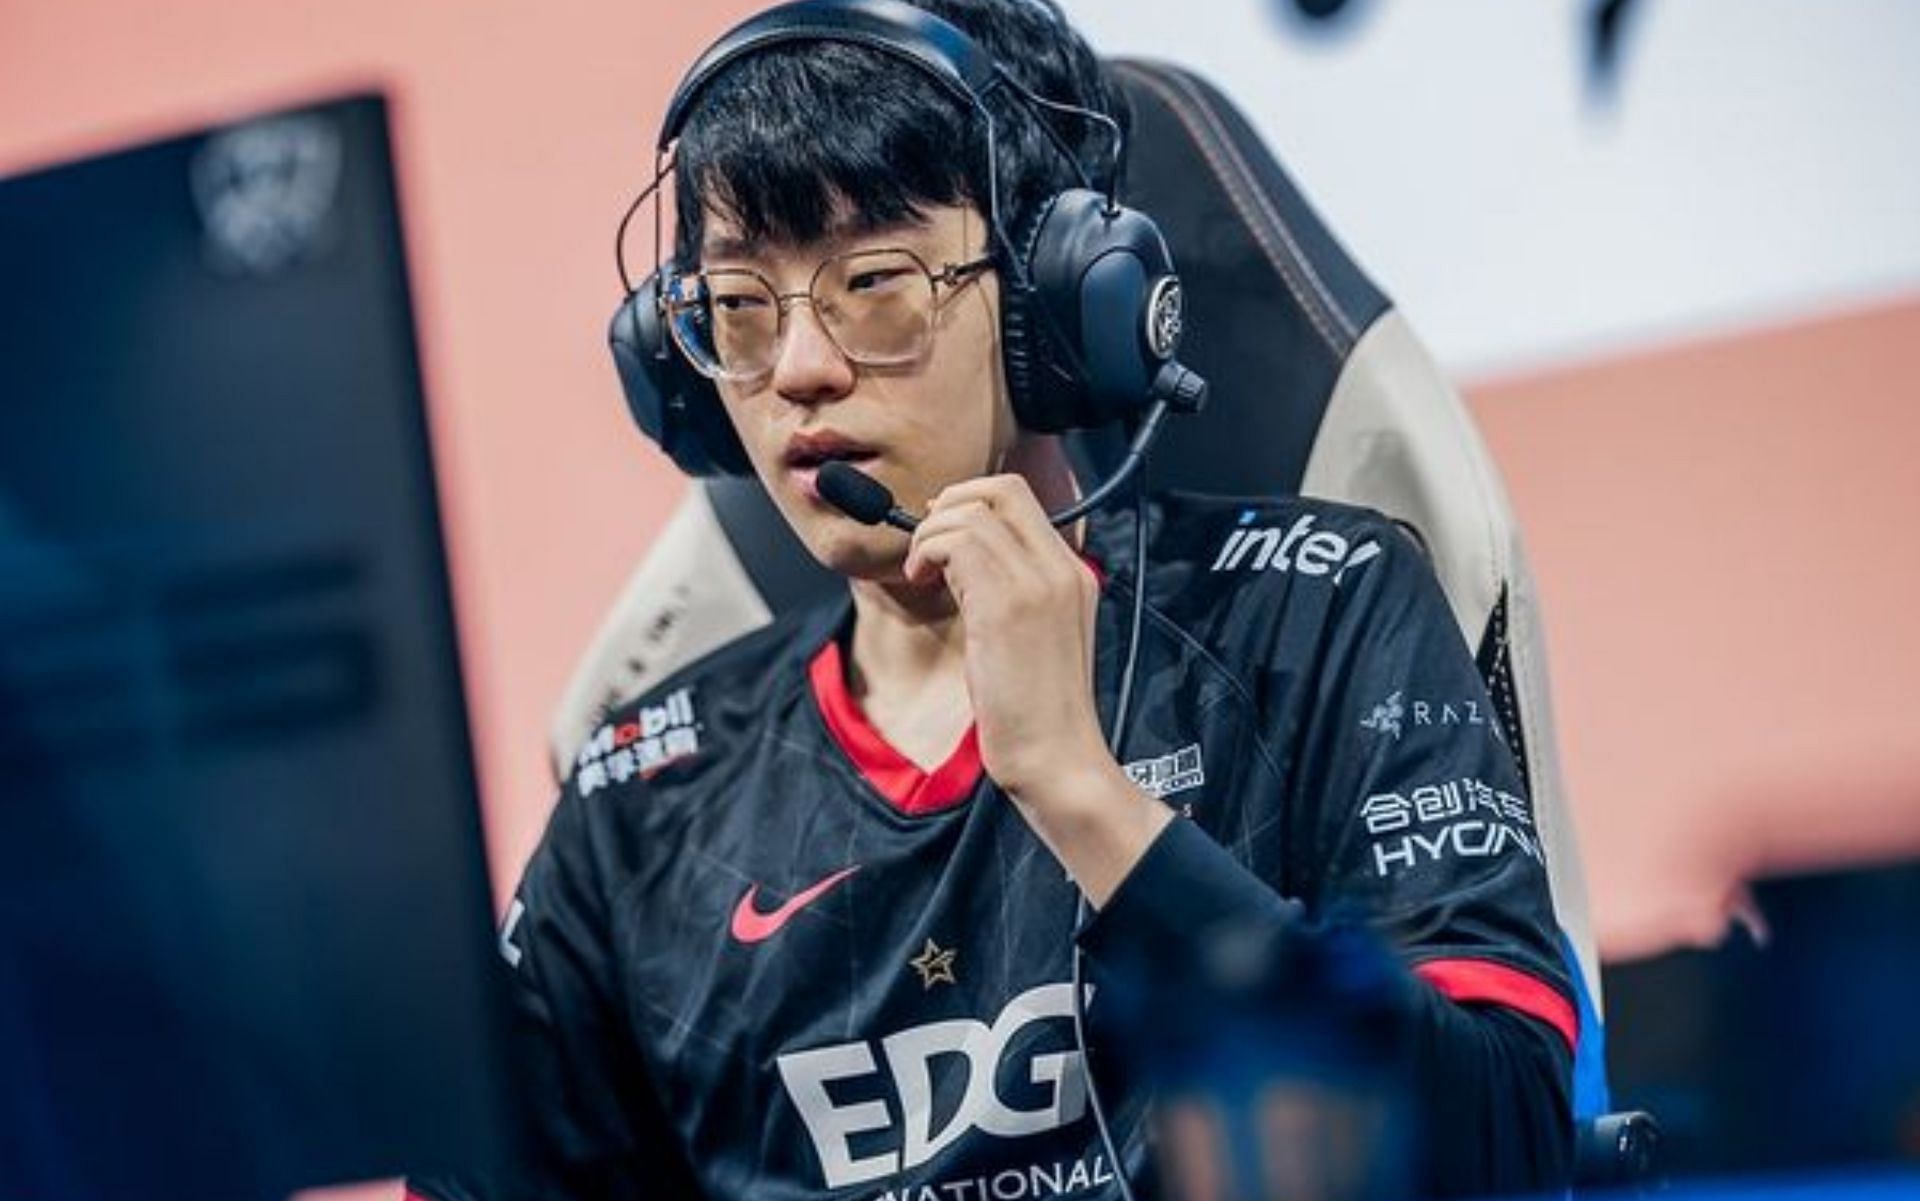 Scout has left EDG and joined LNG for the 2023 season (Image via Riot Games)